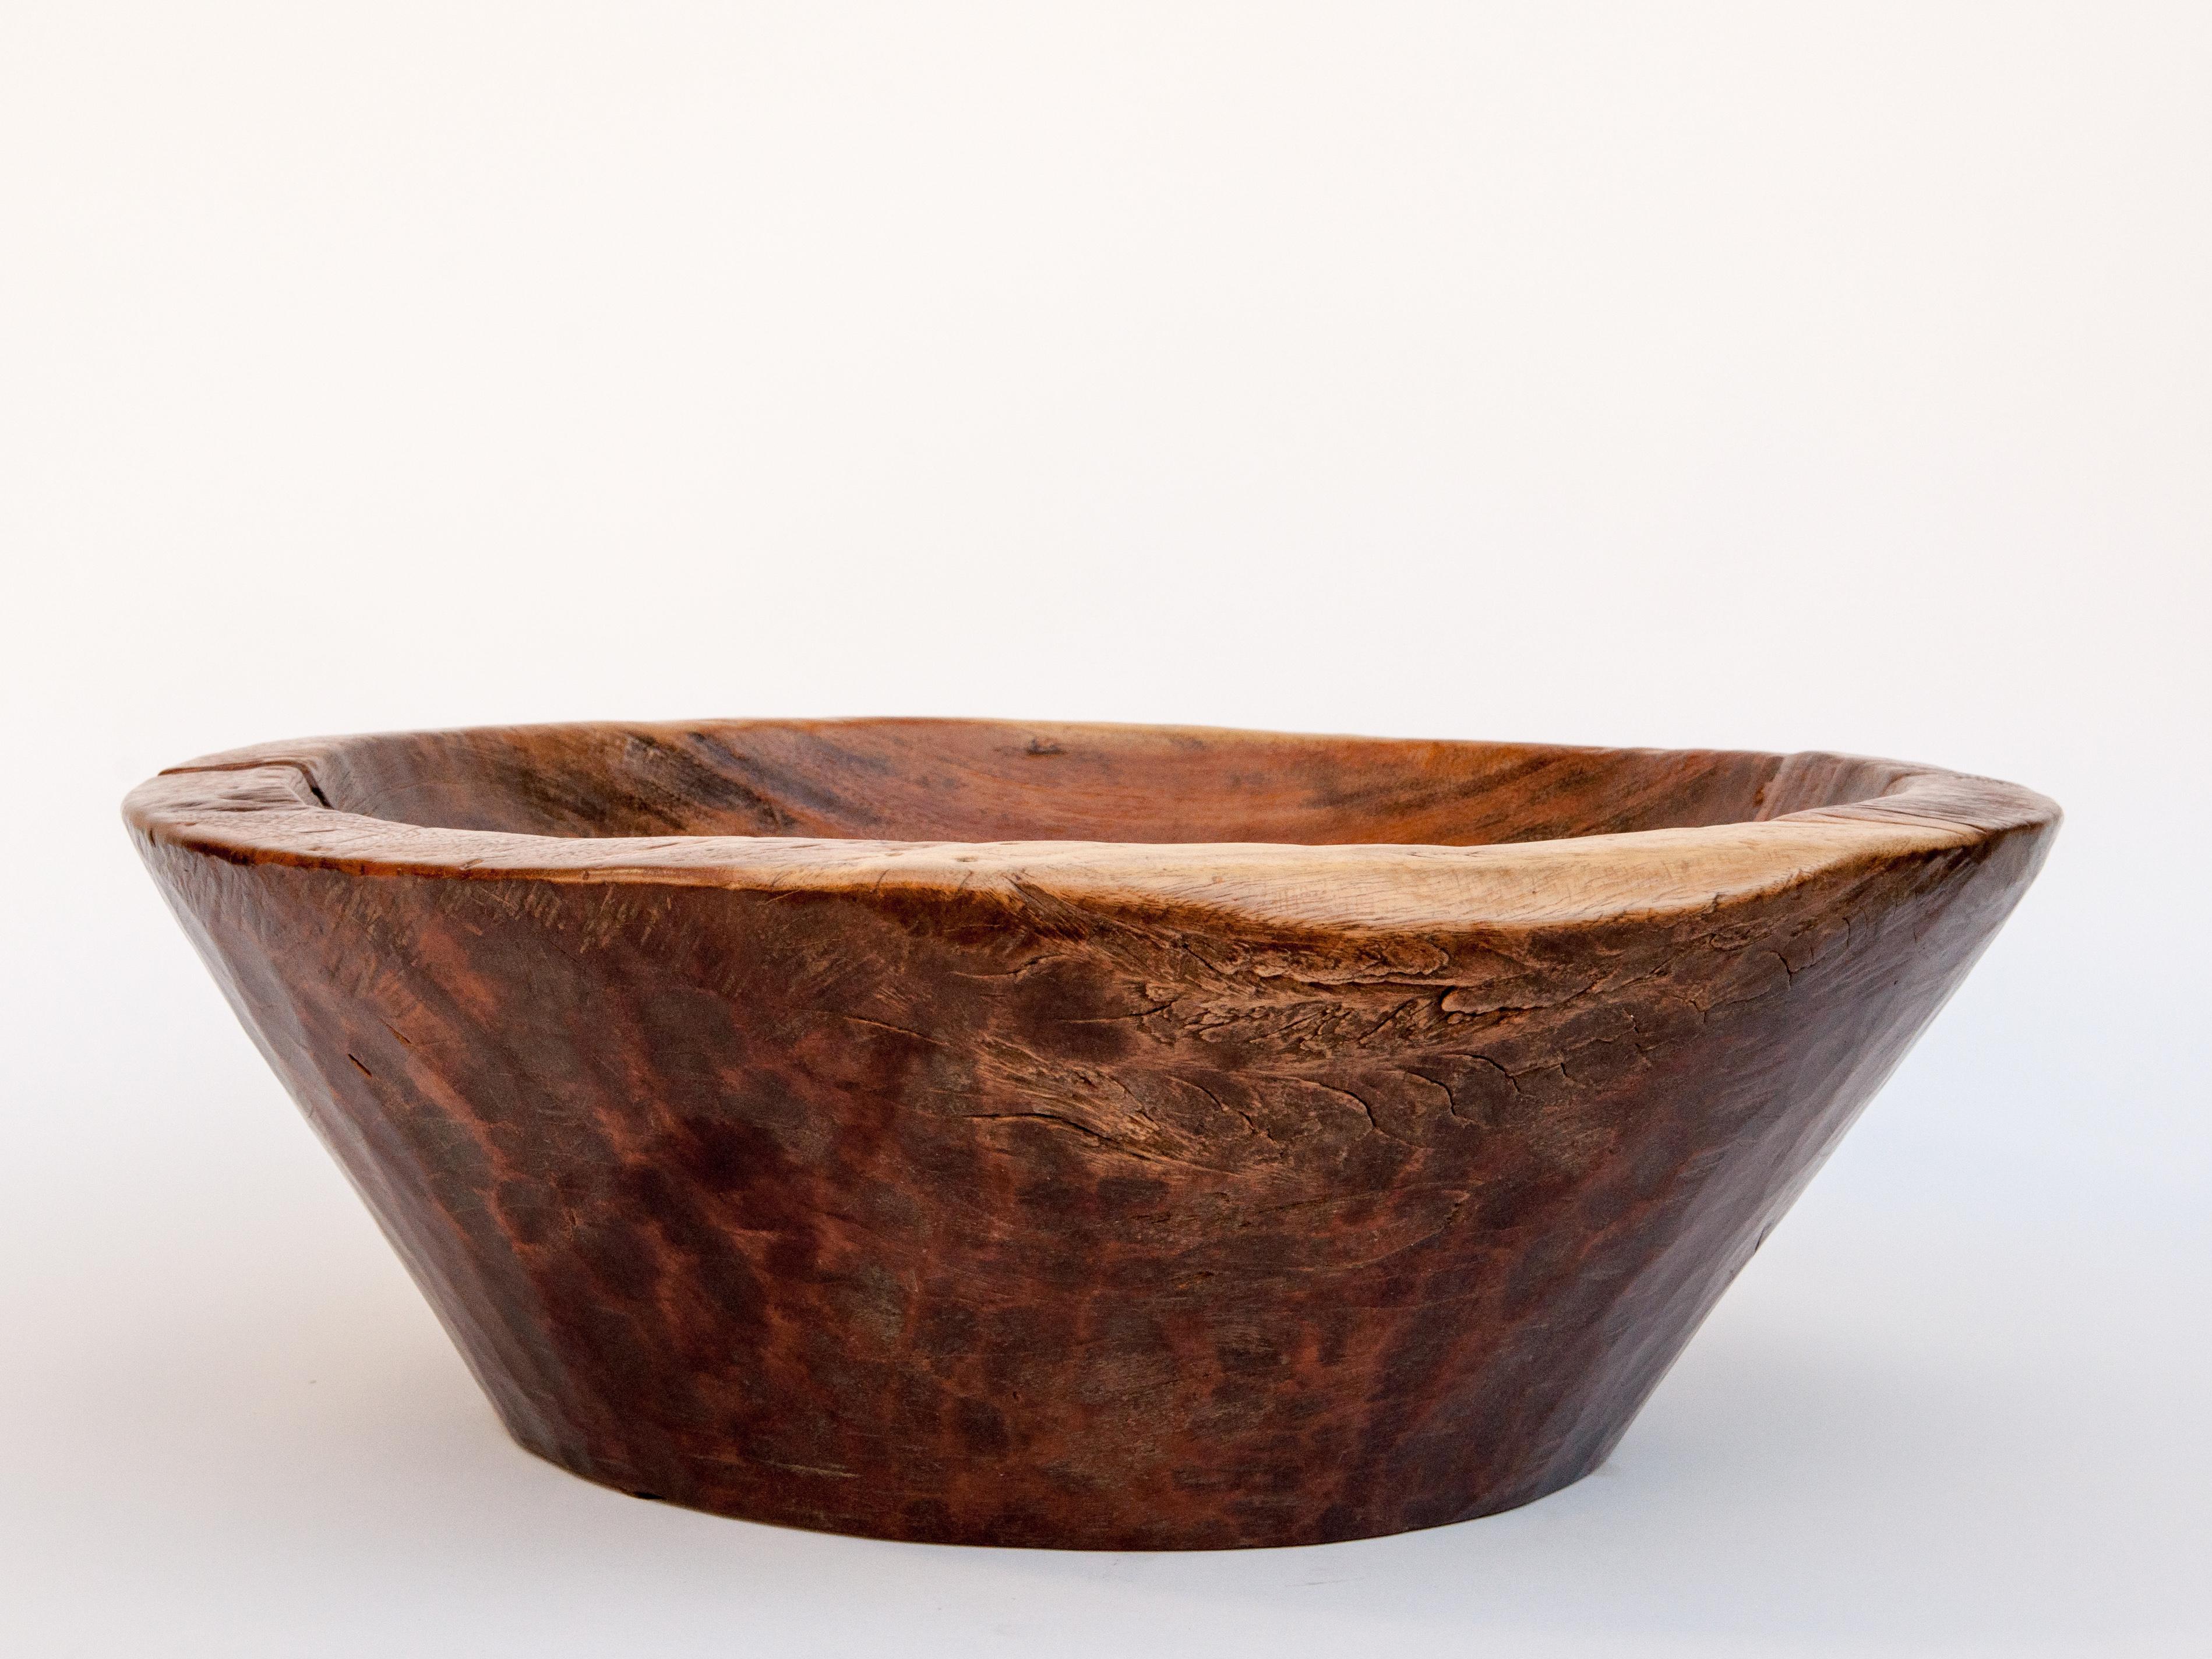 Large vintage teak bowl, hand hewn, 23 Dia Cirebon, North Java, mid-20th century
This rustic wood bowl was fashioned by hand from a single piece of teak wood and comes from the Cirebon area of Northern Java. It would have been used to offer food or